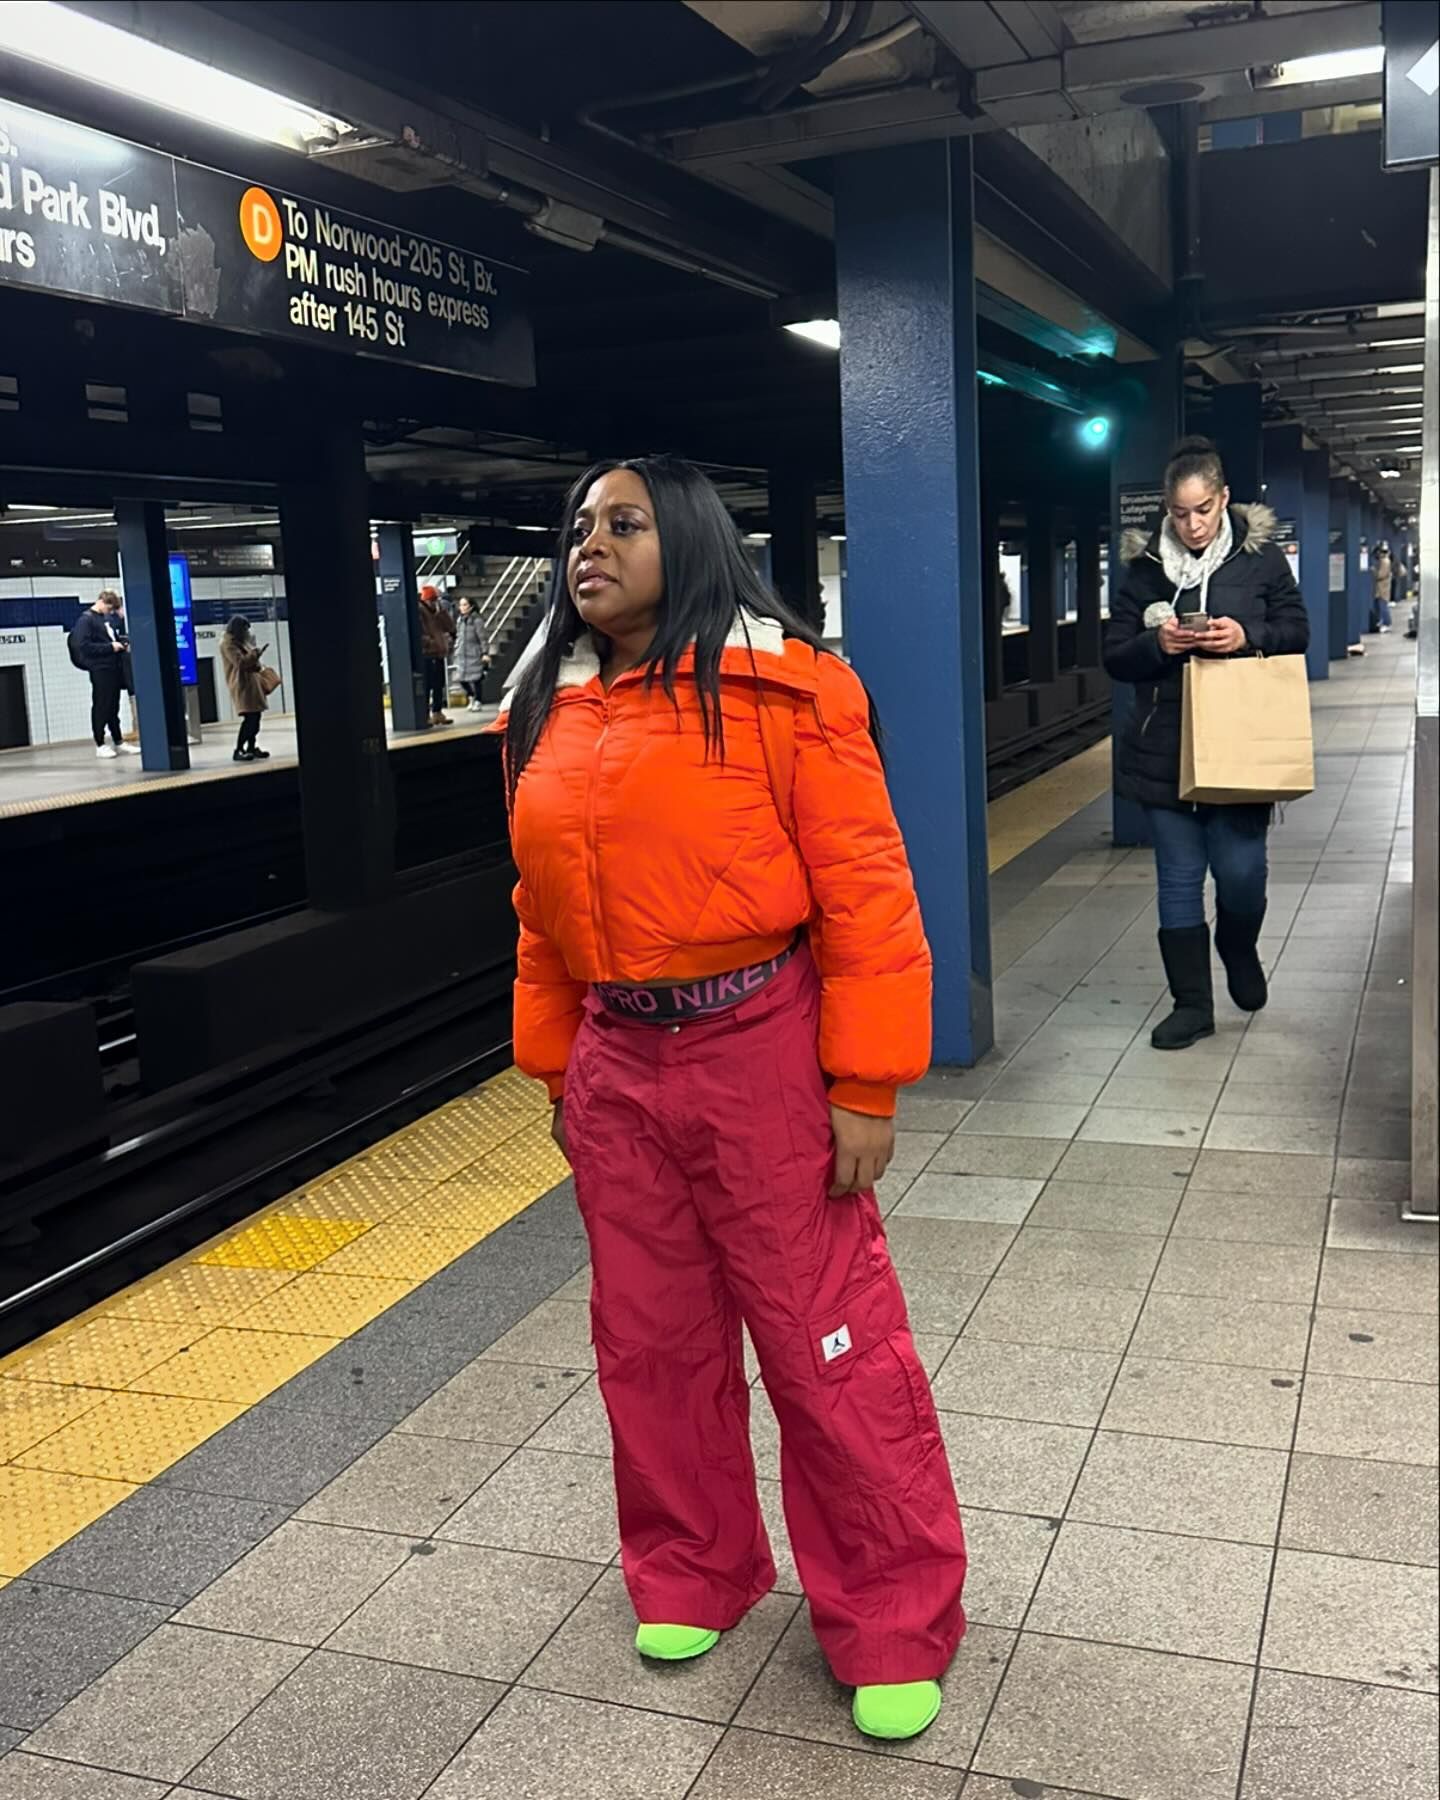 On Saturday, Sherri uploaded a series of snapshots showing her riding on and waiting for the subway to Instagram